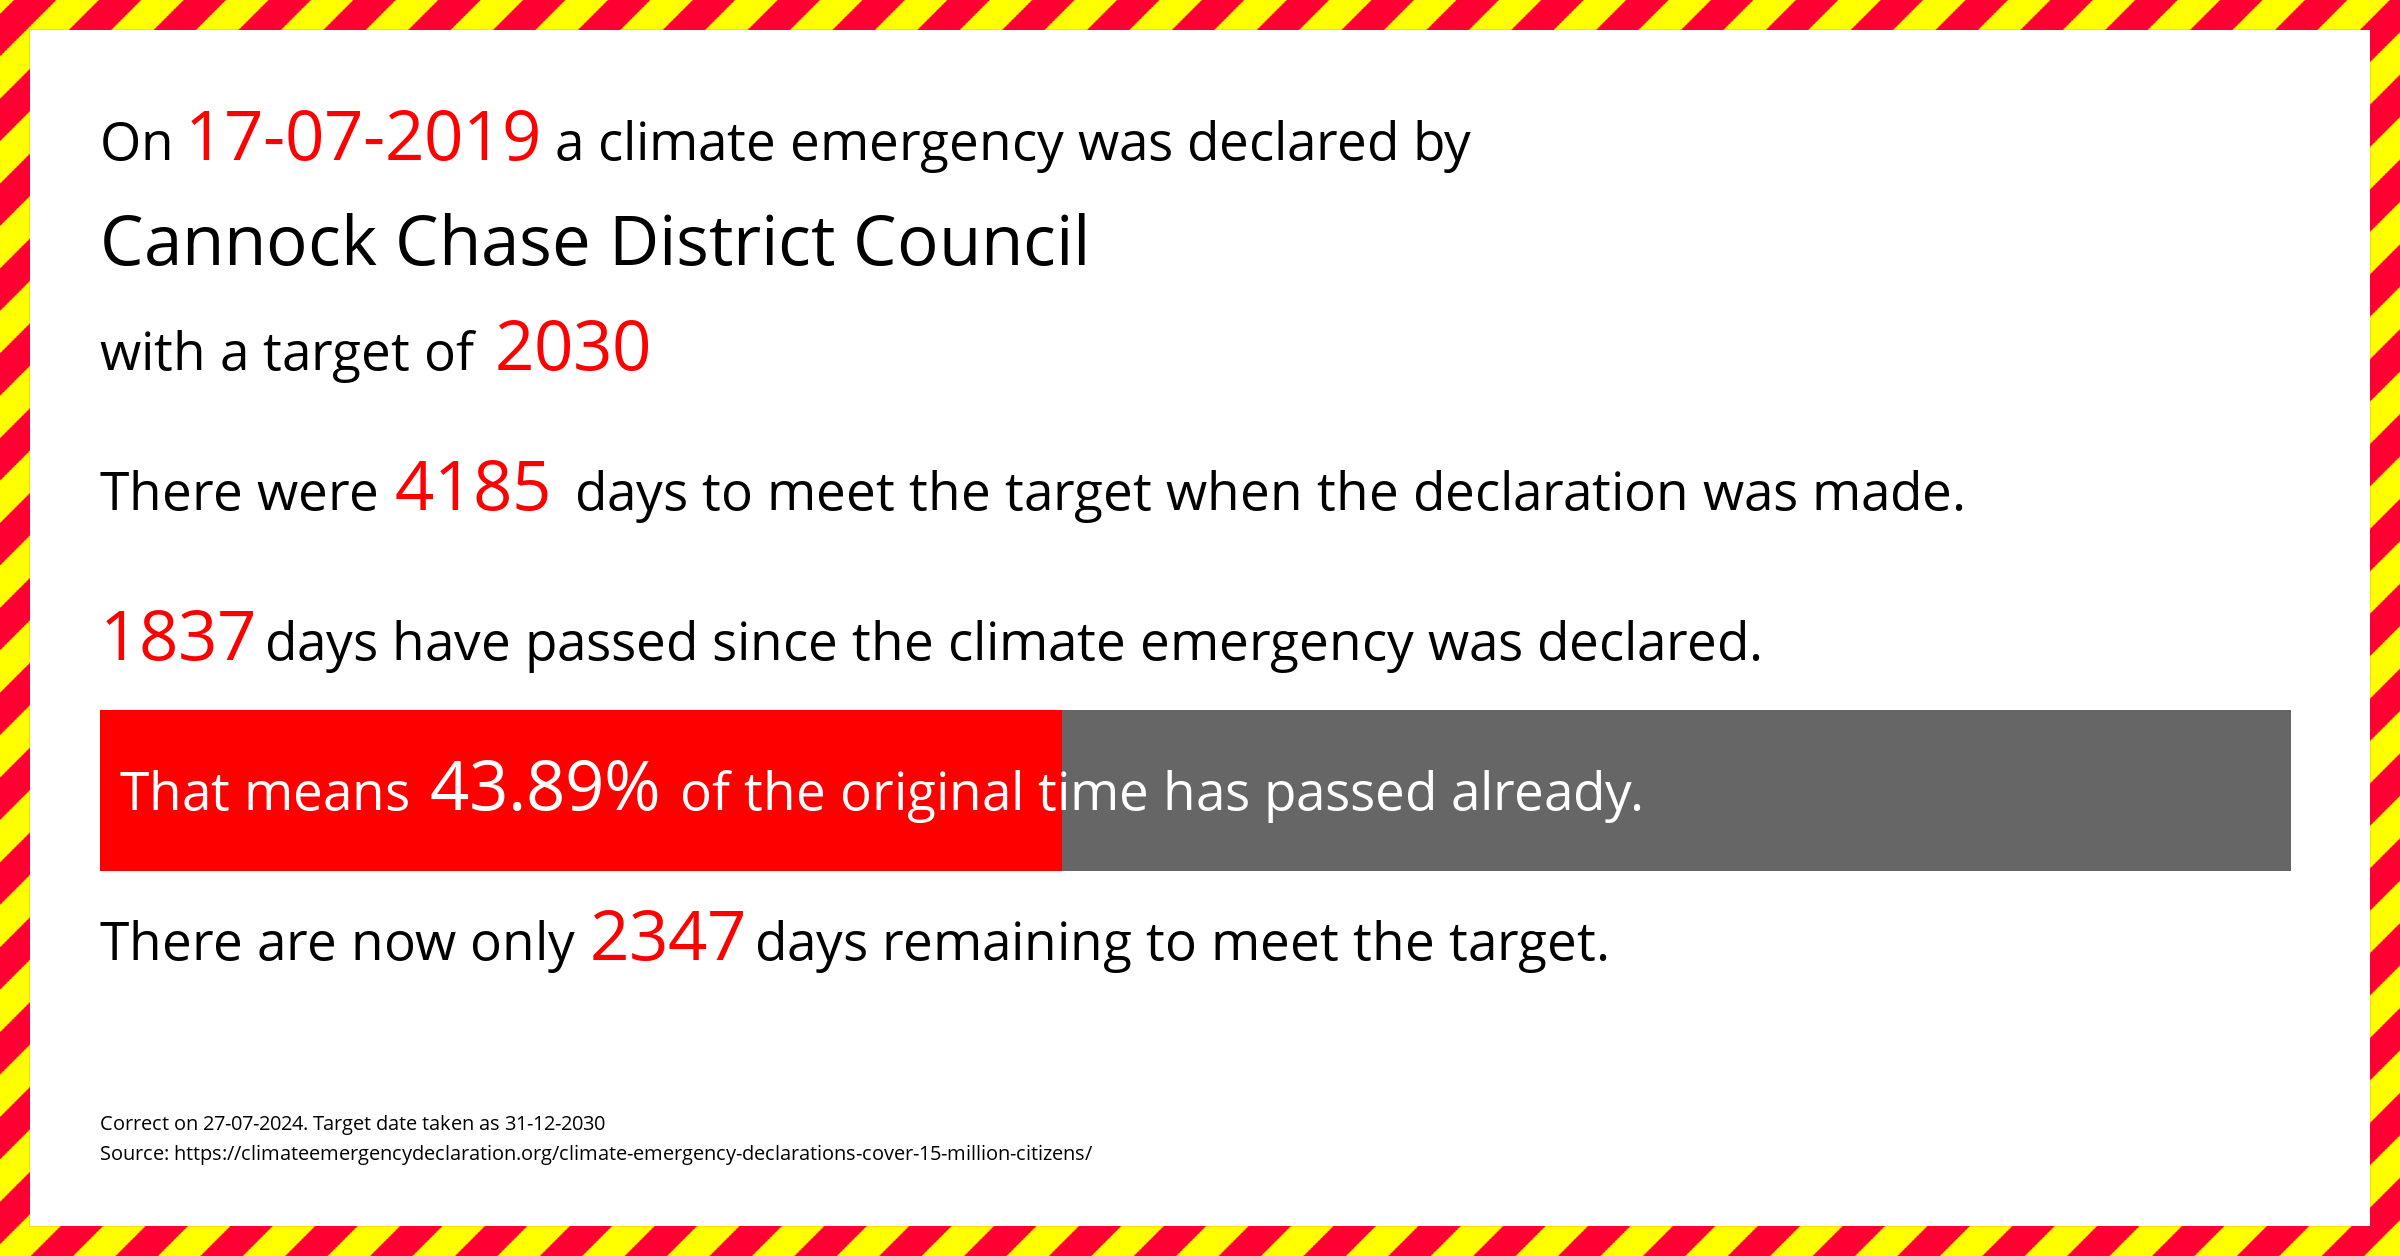 Cannock Chase District Council declared a Climate emergency on Wednesday 17th July 2019, with a target of 2030.